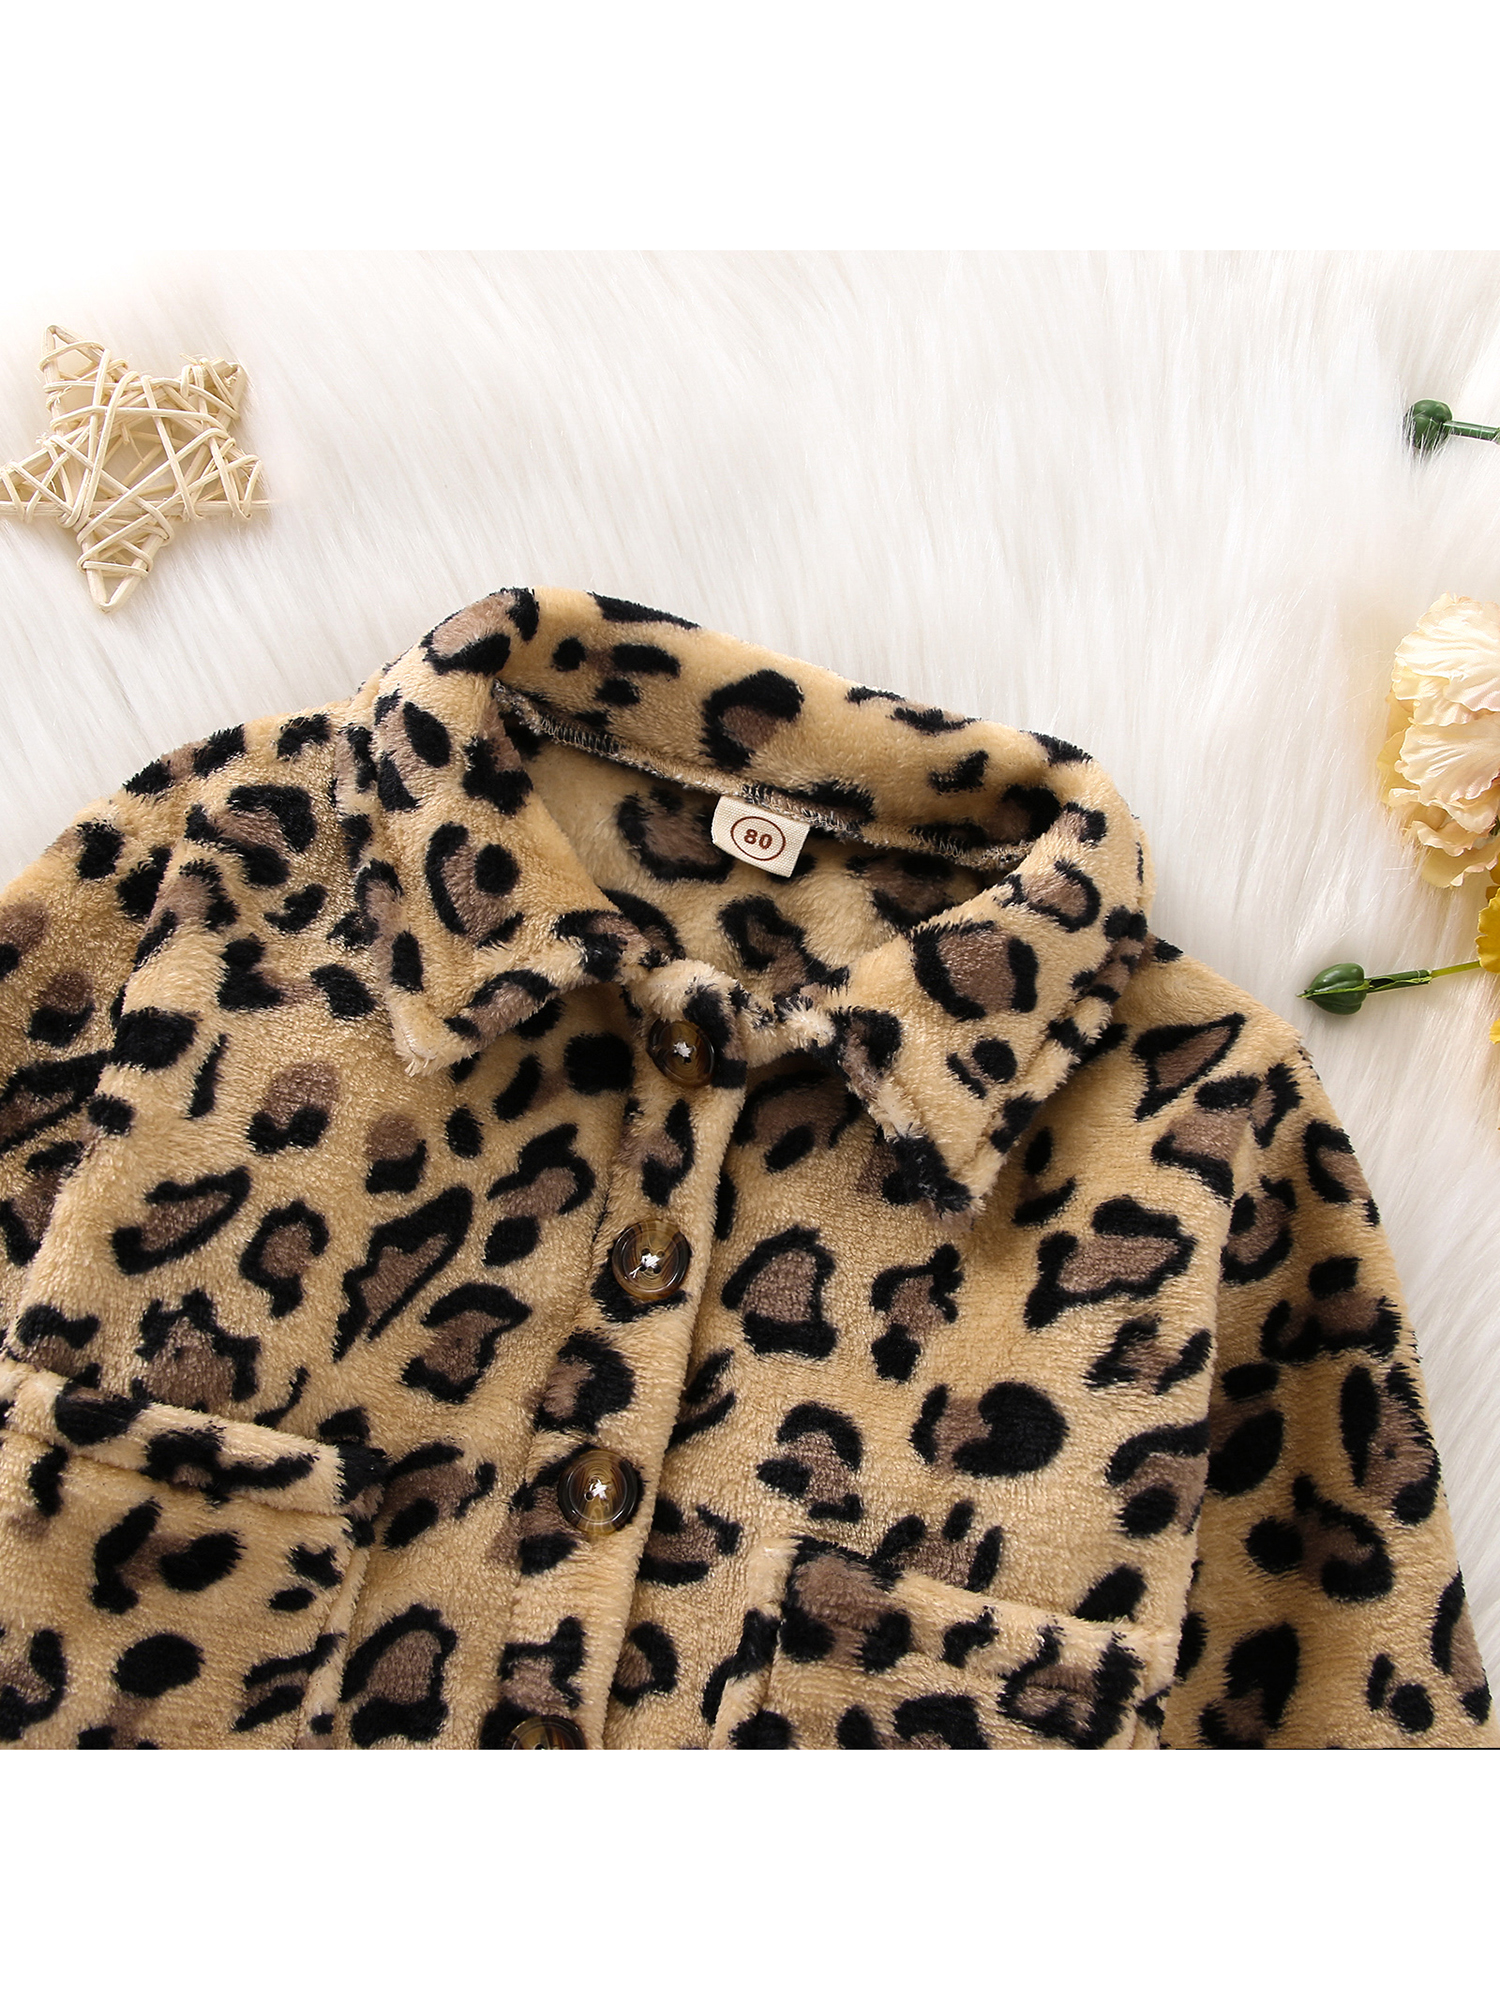 One opening Toddler Baby Winter Jacket Fashion Long Sleeve Leopard Print Button Down Plush Coat - image 4 of 9